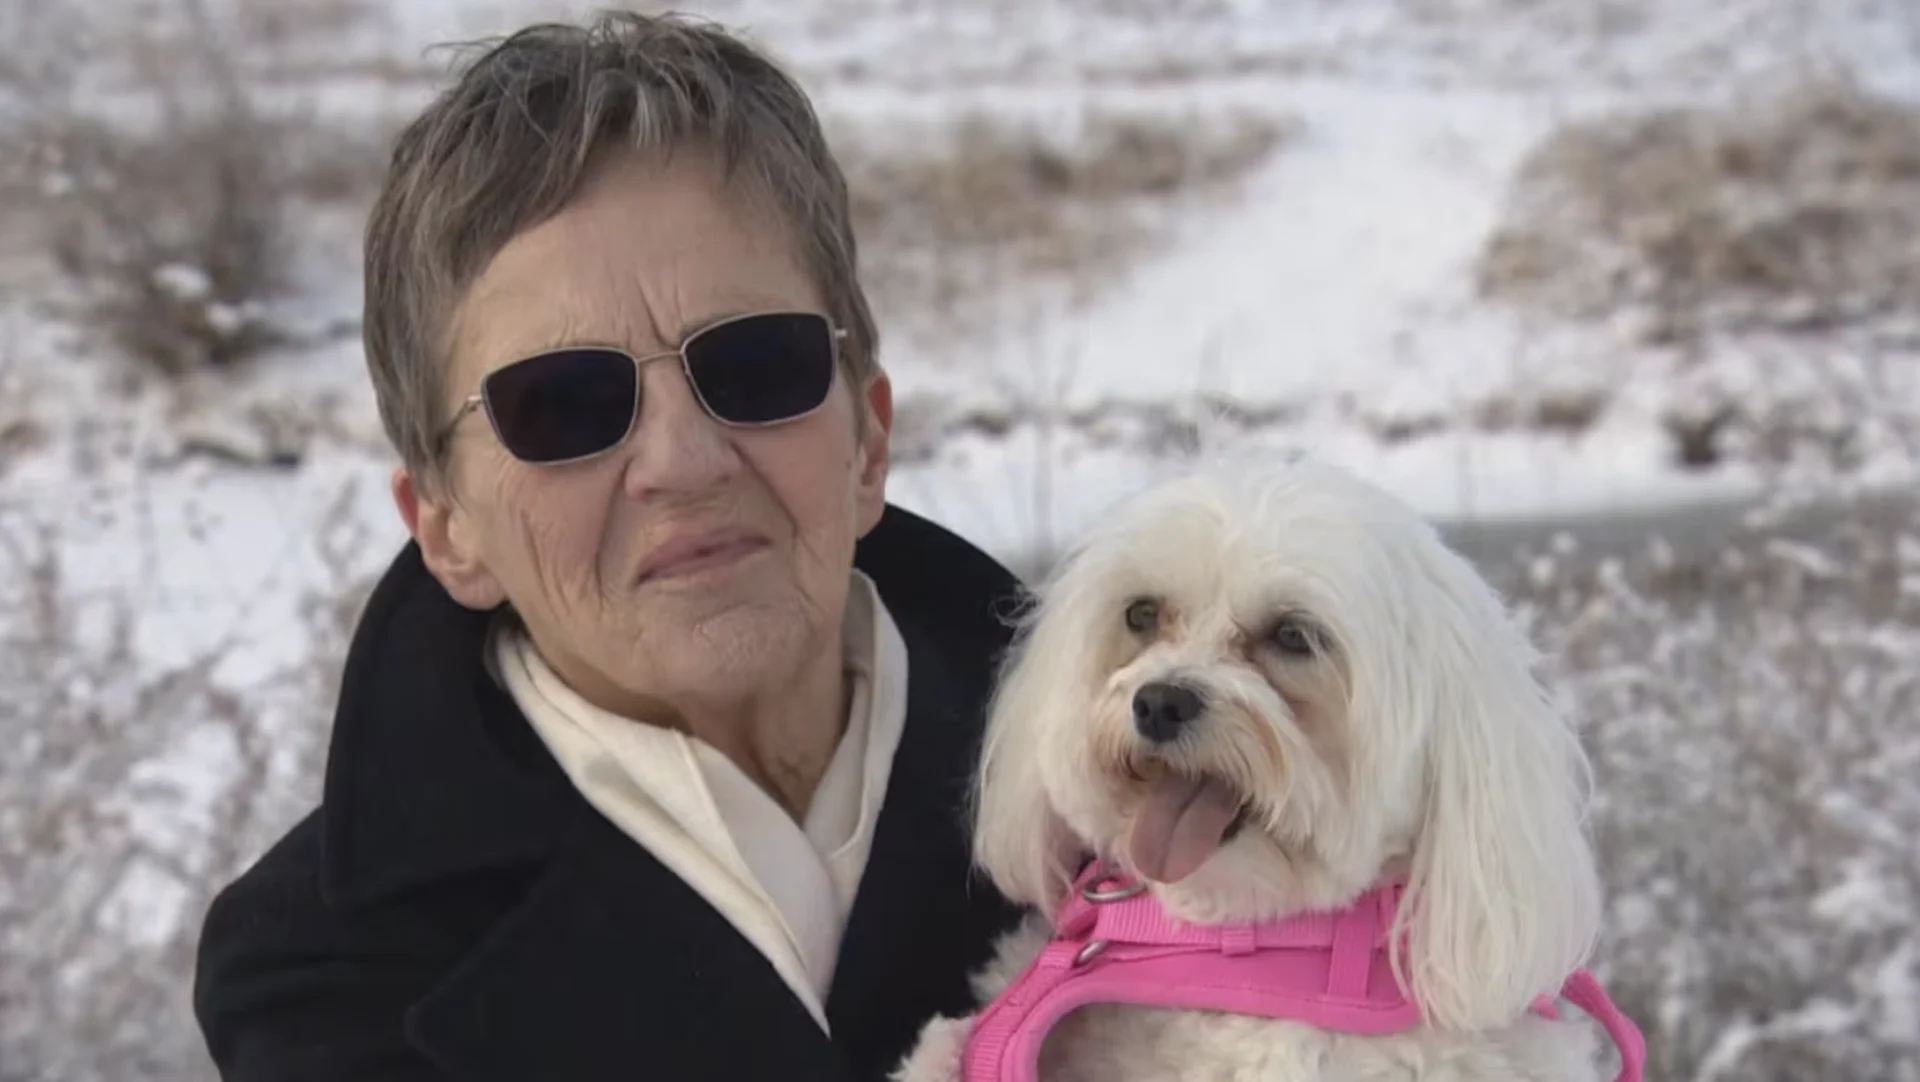 Regina woman reunites dog with her owner after icy water rescue